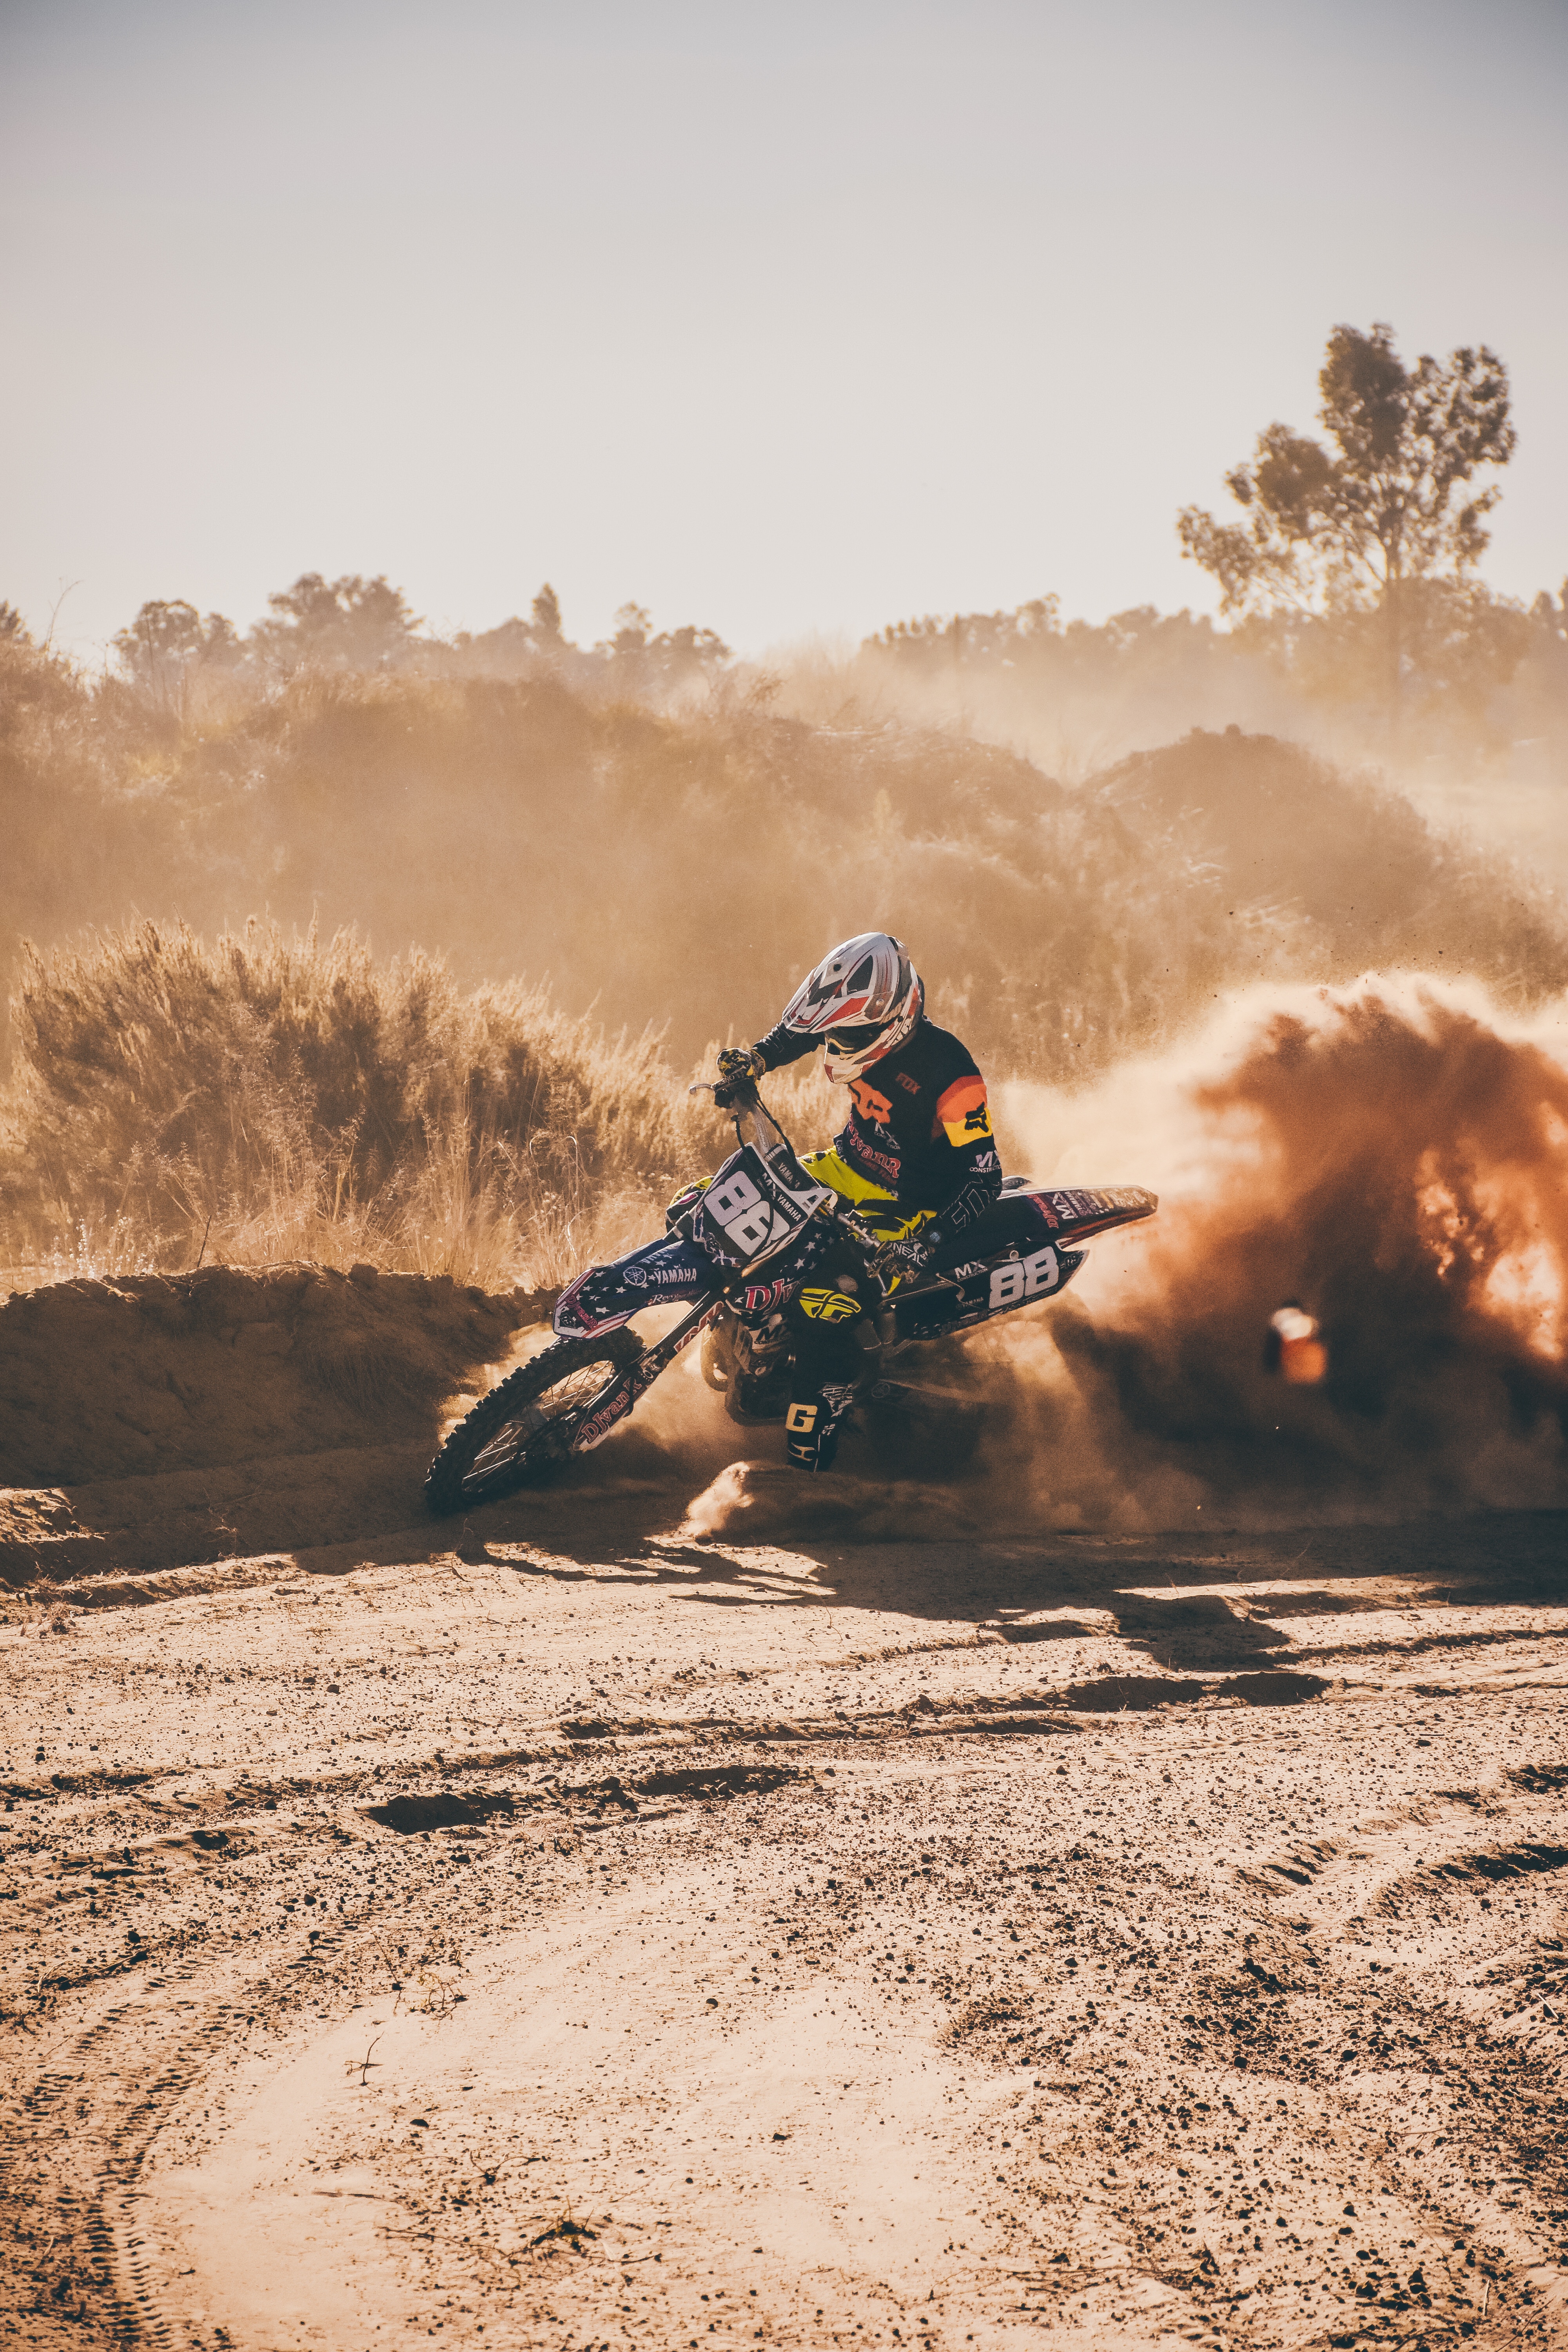 drift, rally, motorcyclist, sports, races, motorcycle, off road, impassability